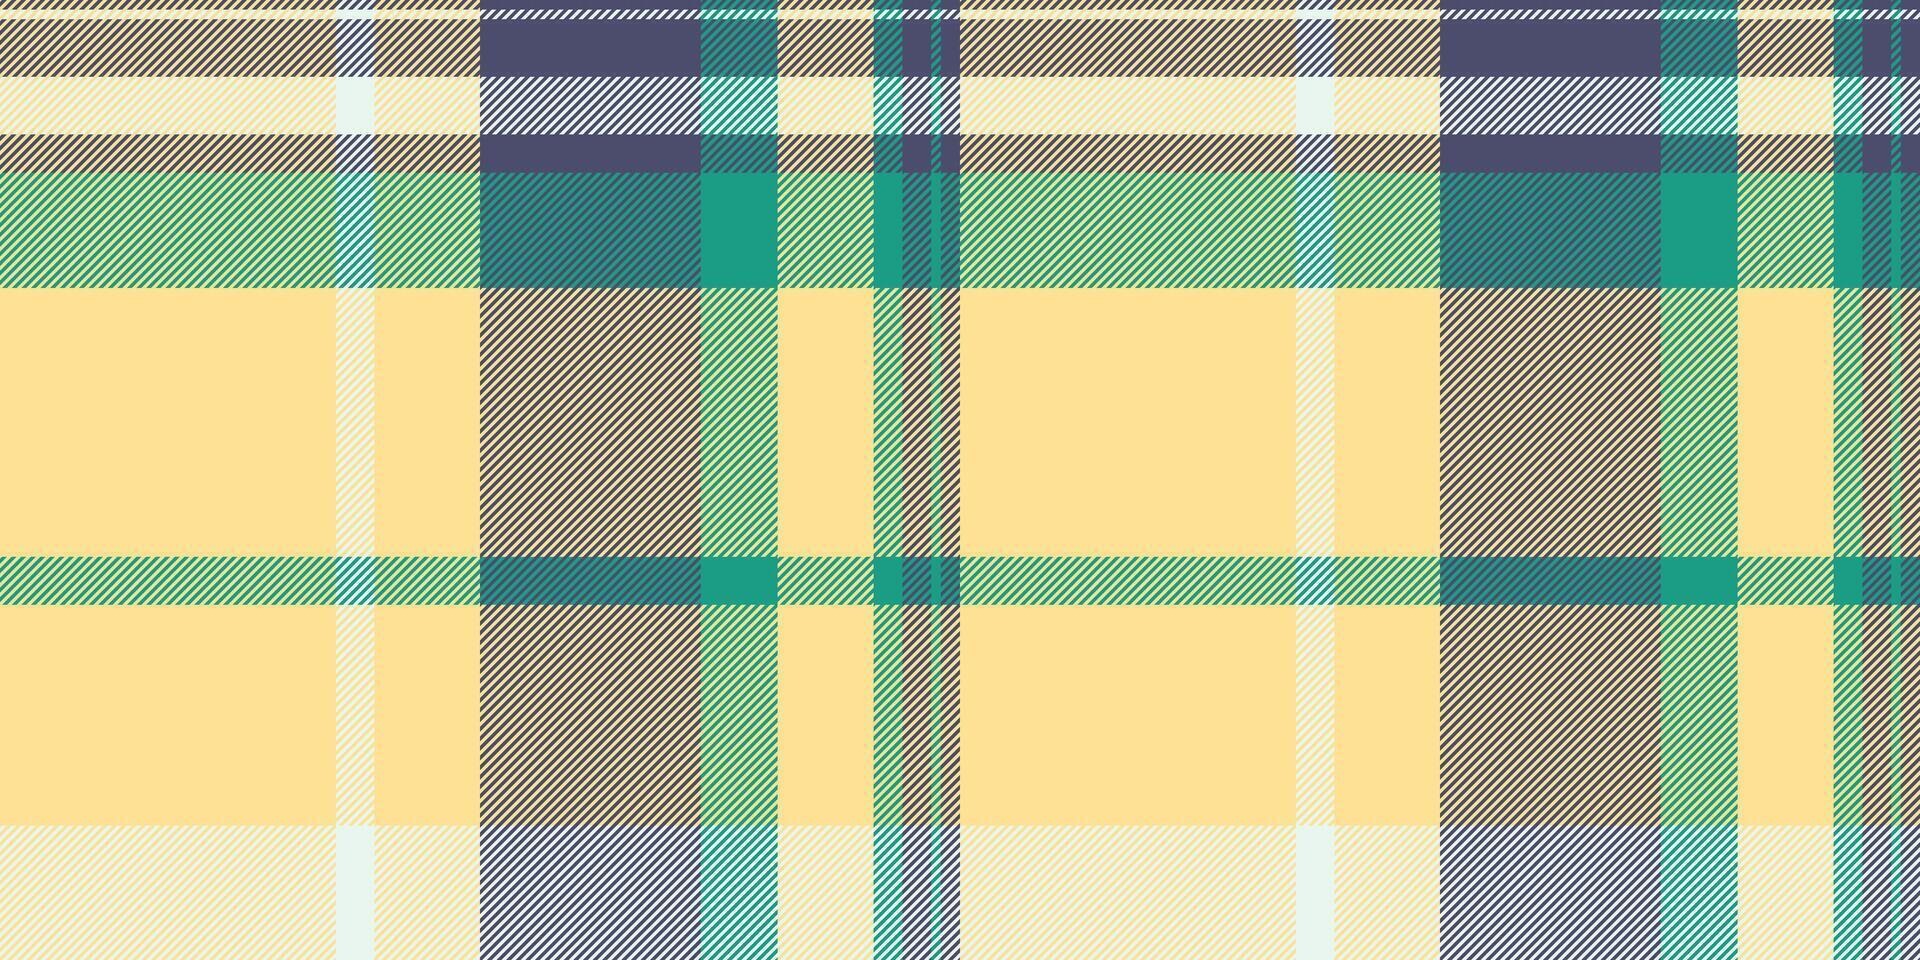 Linear tartan background pattern, argyle plaid textile seamless. English check texture vector fabric in amber and blue colors.